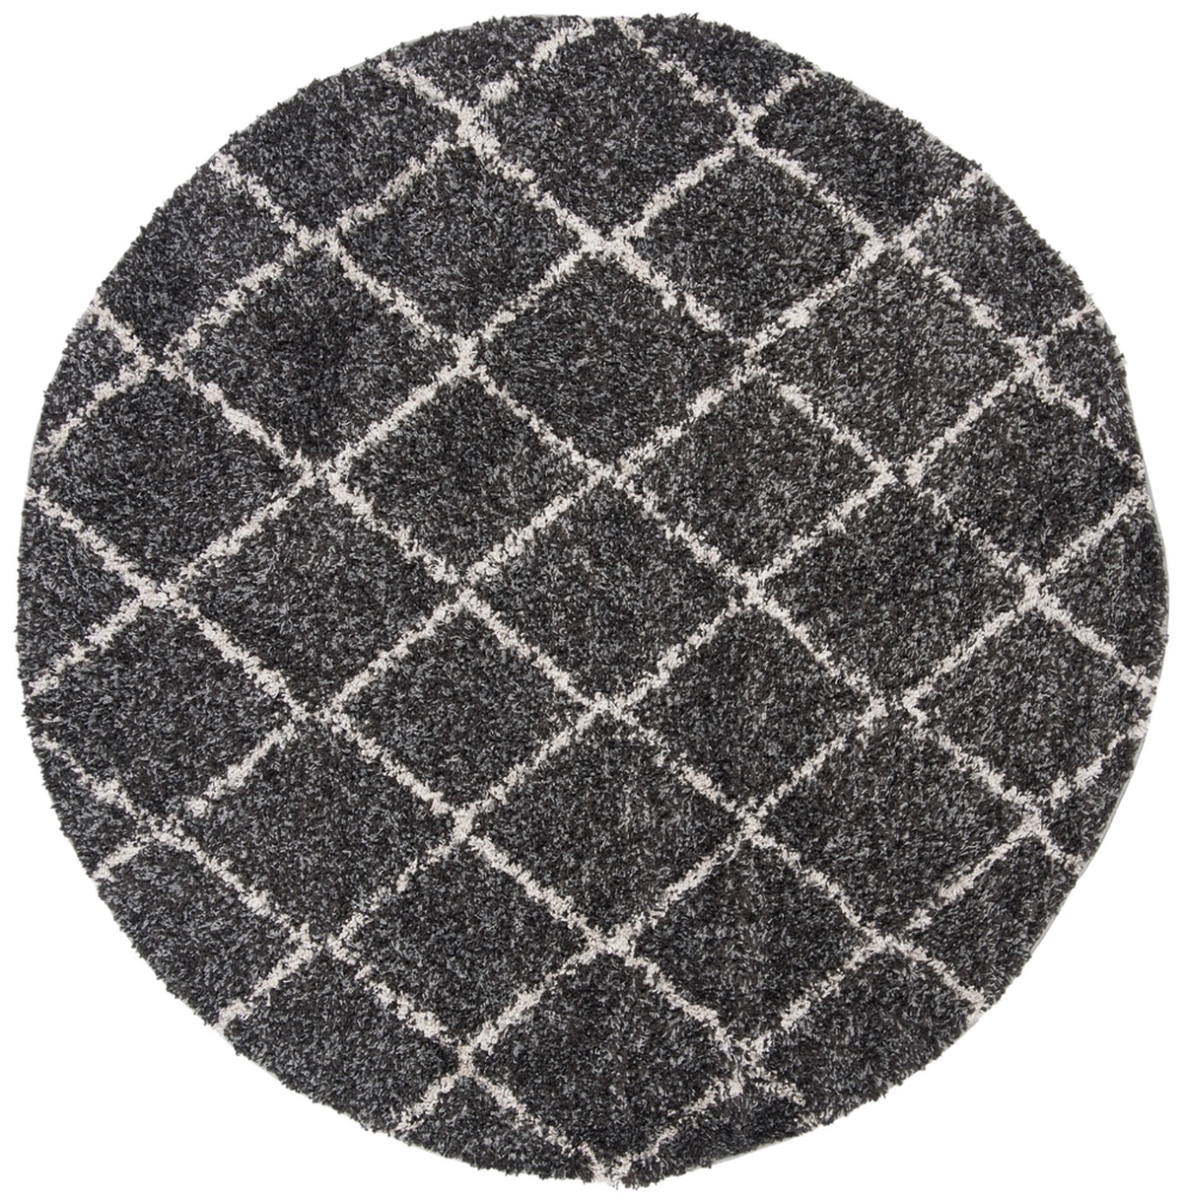 Asg742c-7r Arizona Shag Power Loomed Round Area Rug, Anthracite & Beige - 6 Ft.-7 In. X 6 Ft.-7 In.